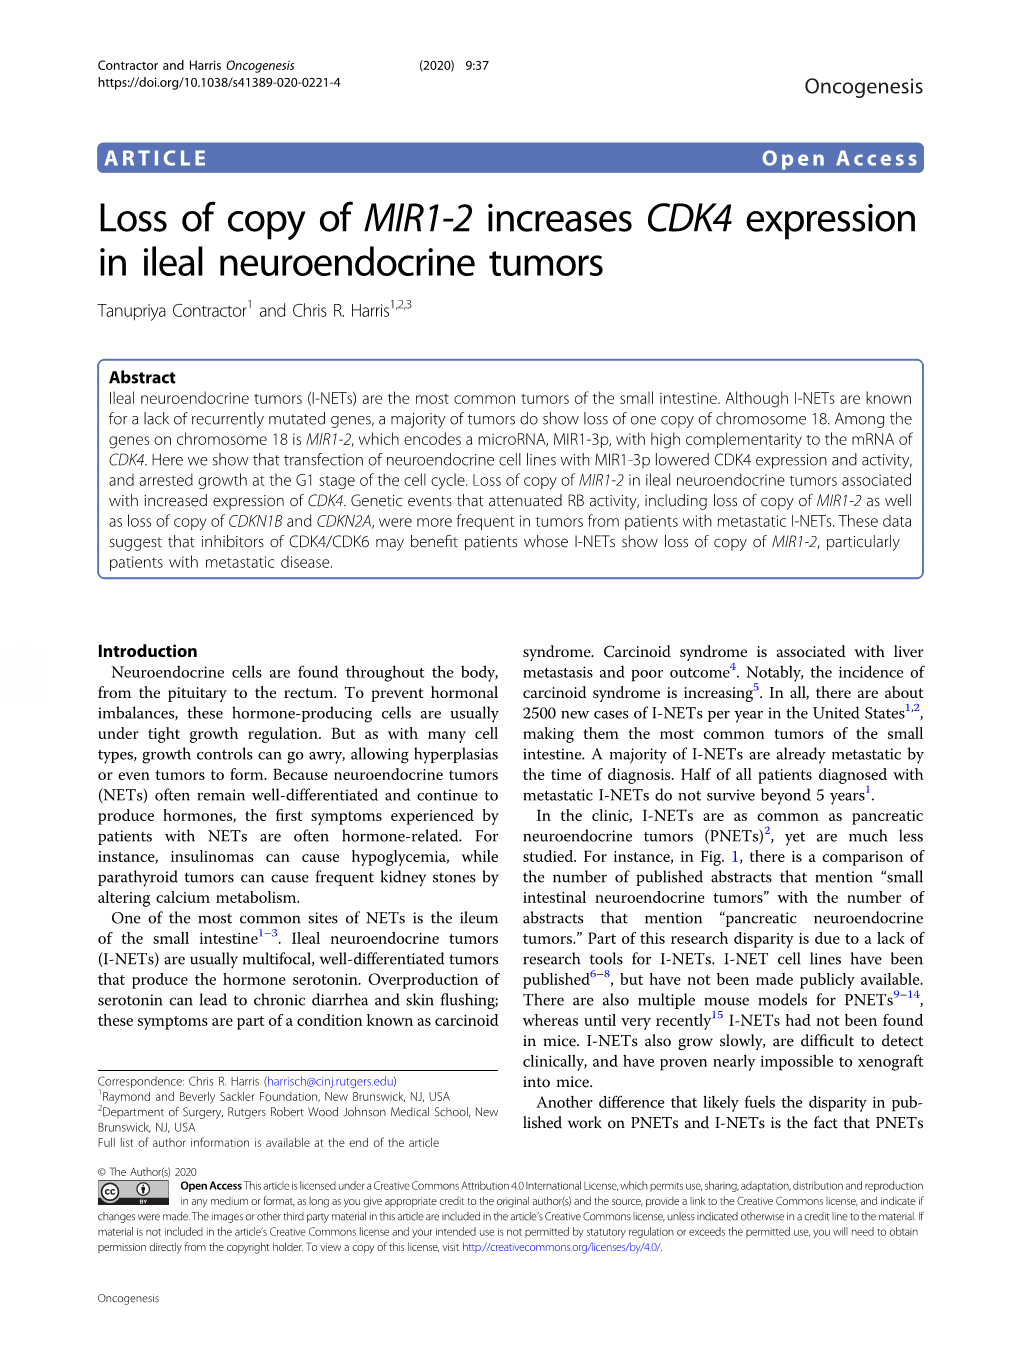 Loss of Copy of MIR1-2 Increases CDK4 Expression in Ileal Neuroendocrine Tumors Tanupriya Contractor1 and Chris R